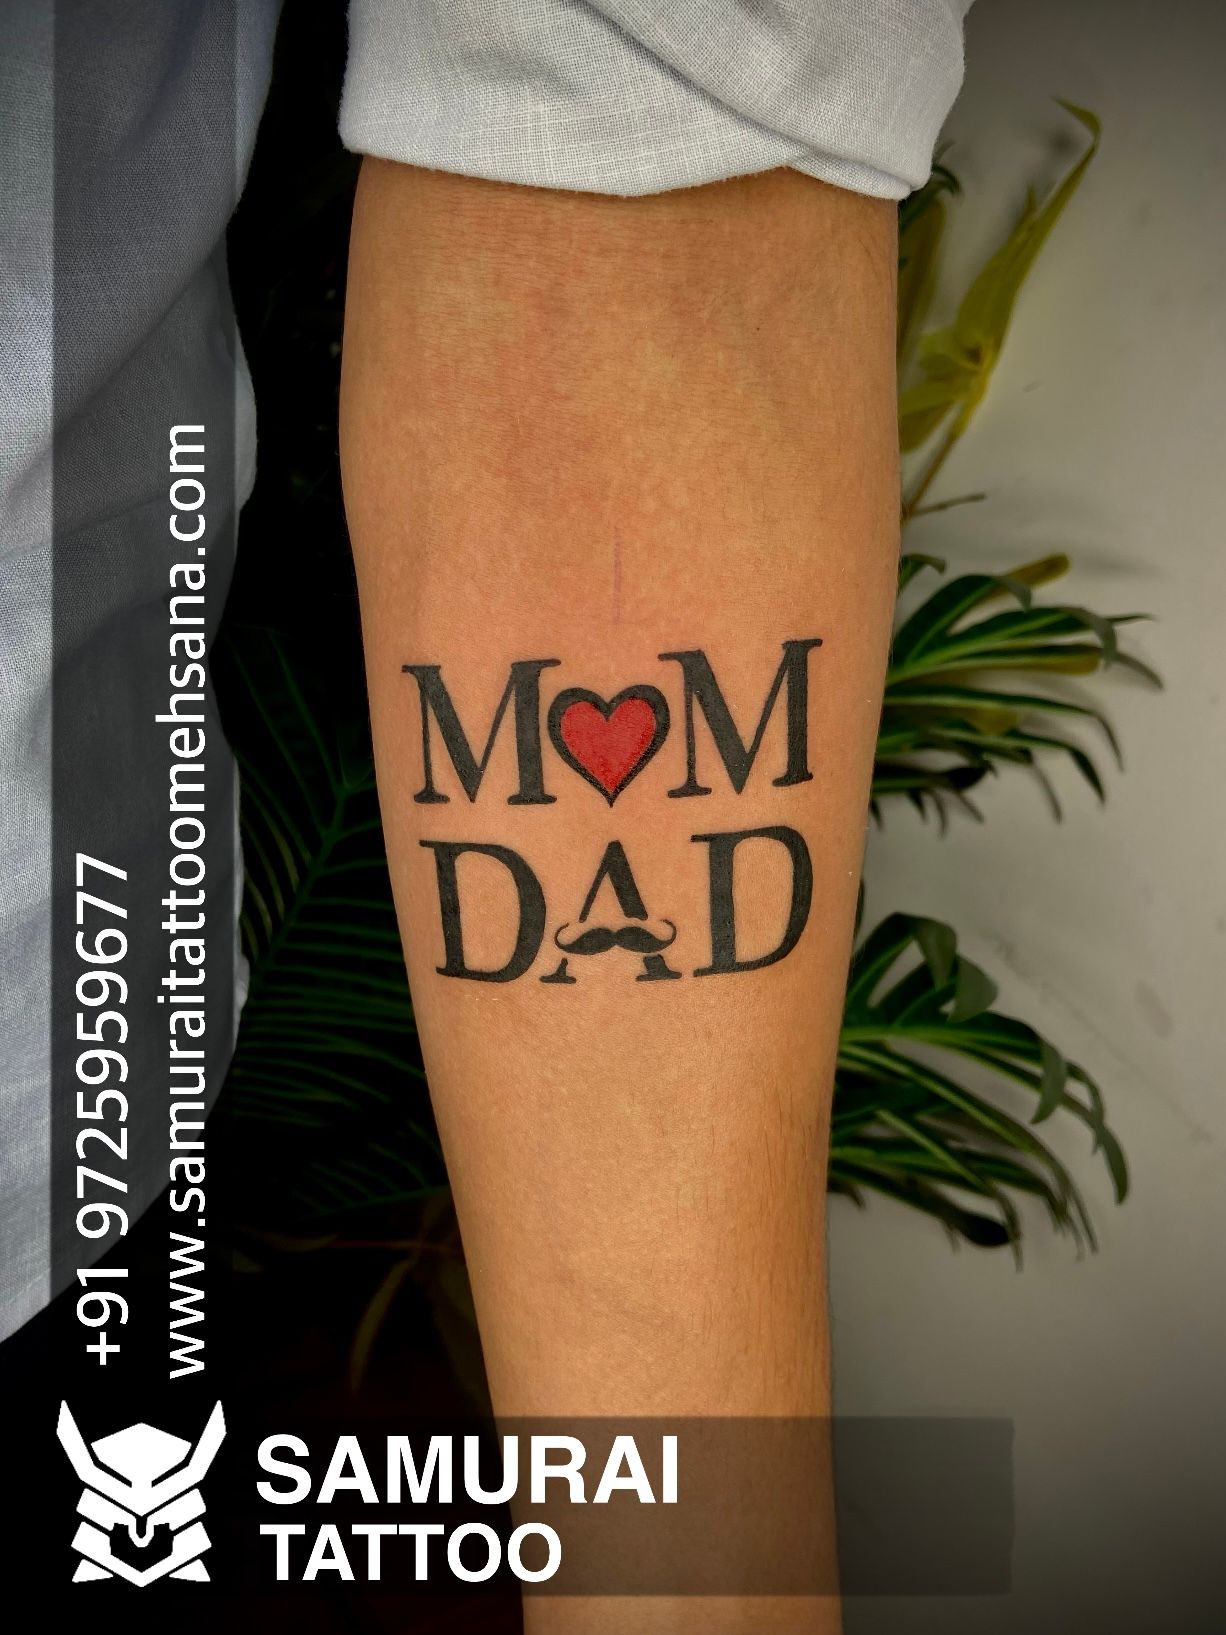 124 Heartfelt Mom and Dad Tattoos That Are Currently On The Trend